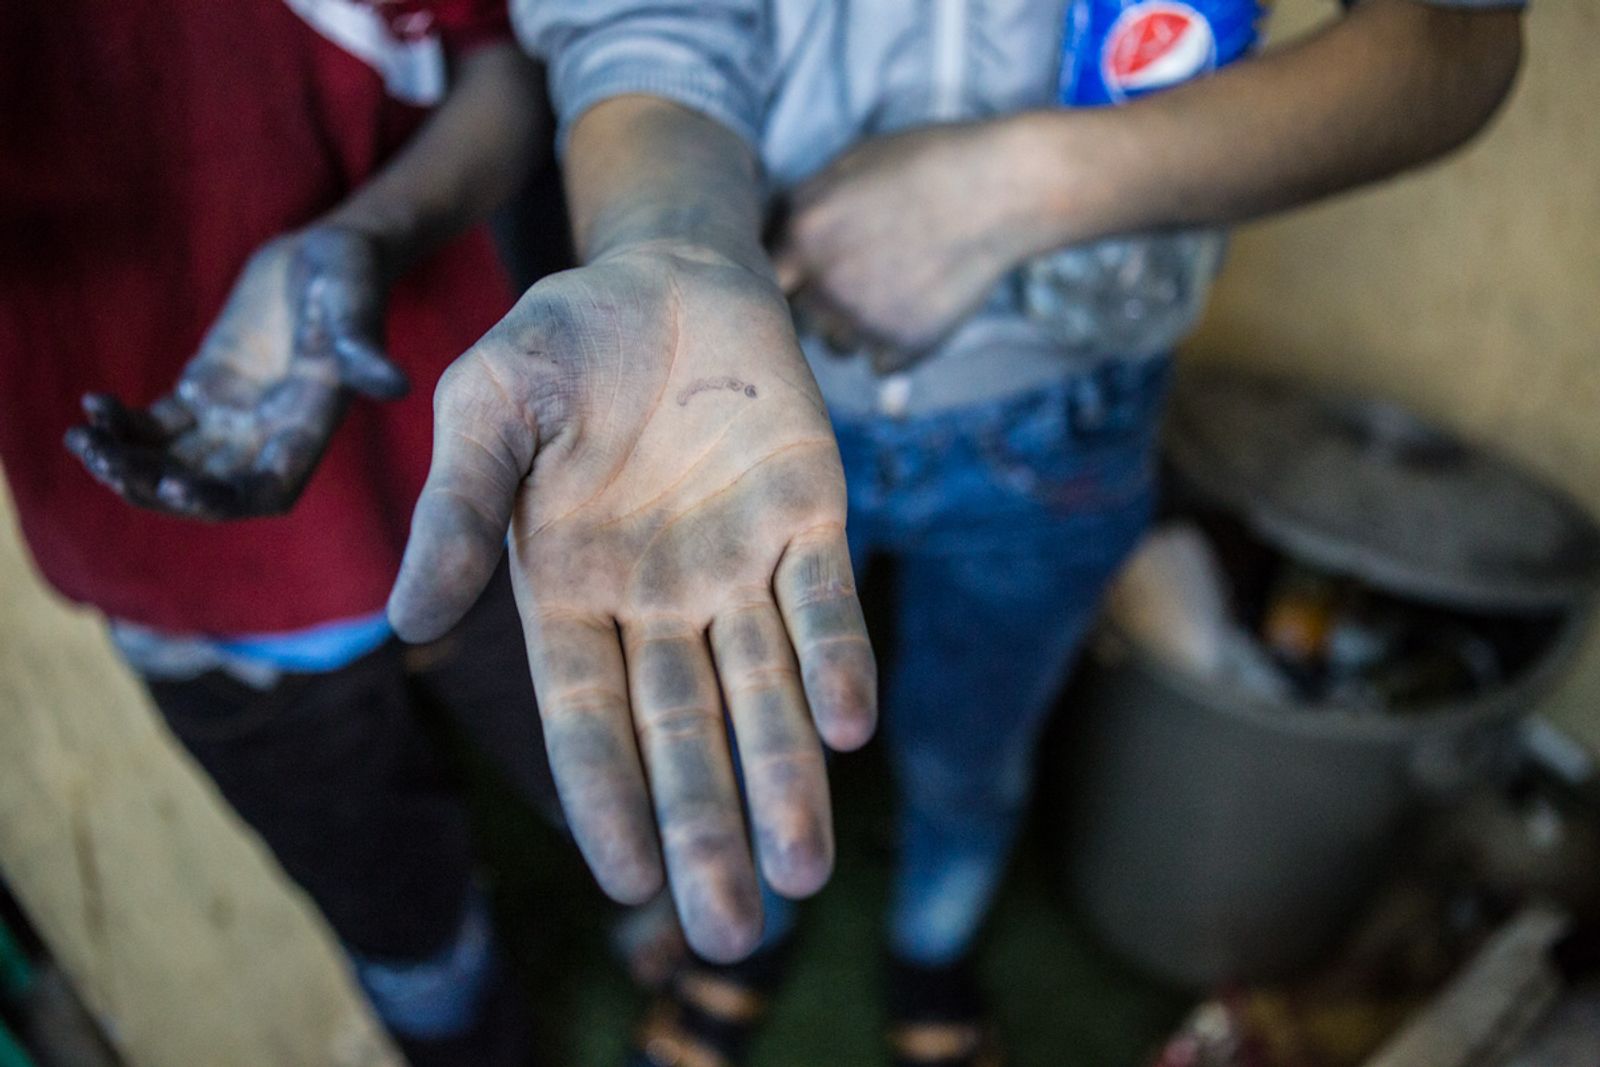 © Valerio Muscella - Syrian kids show their hands while working. Gaziantep, May 2016.